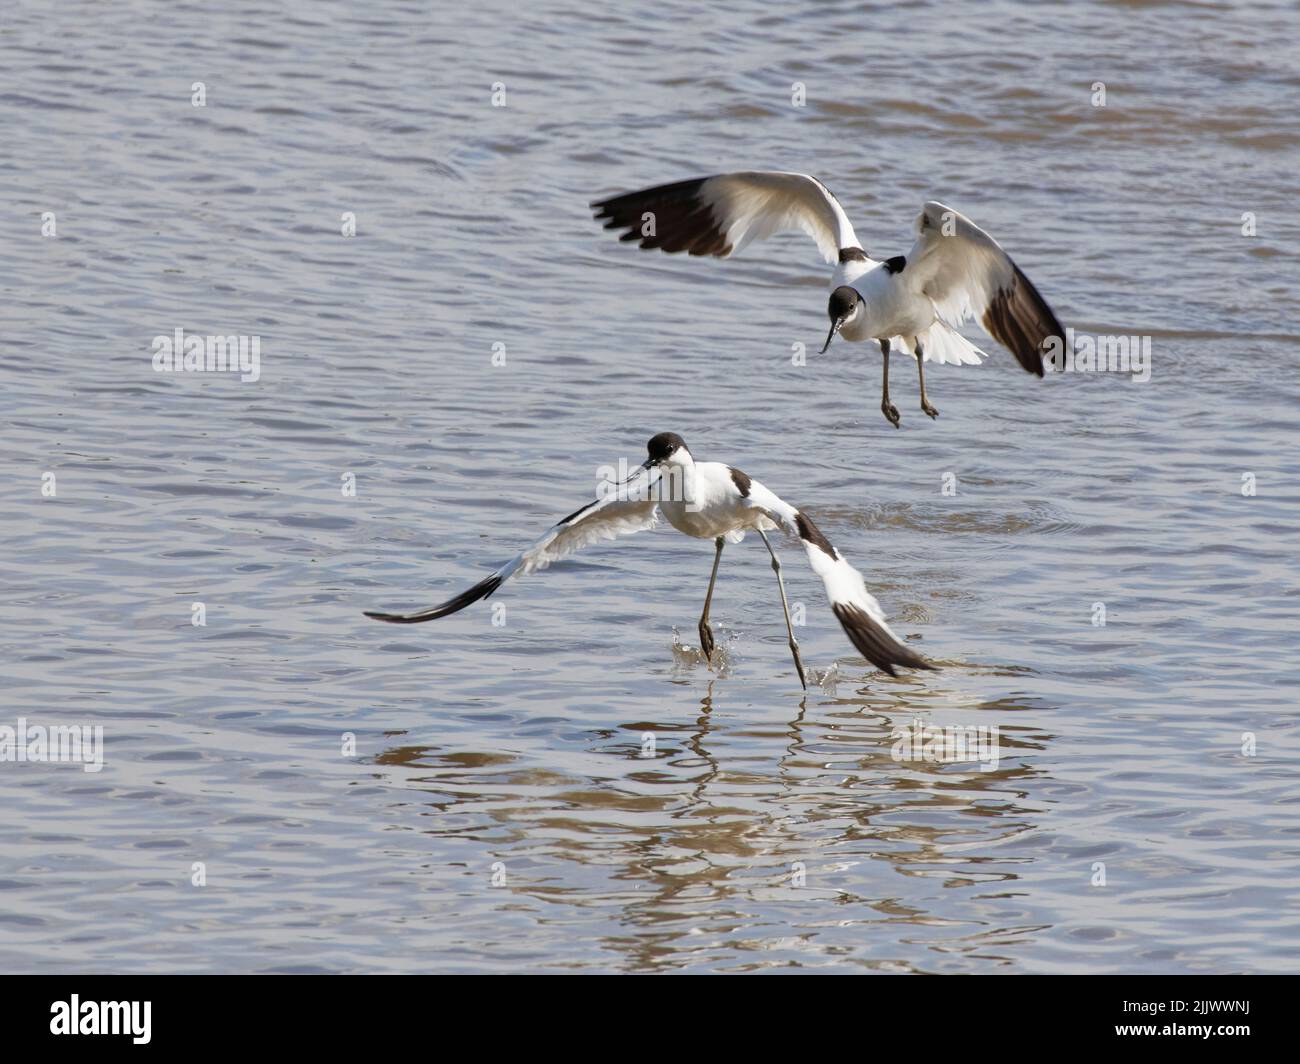 Pied avocet (Recurvirostra avosetta) chasing another in flight during a territorial dispute in a freshwater marshland pool, Gloucestershire, UK, June. Stock Photo